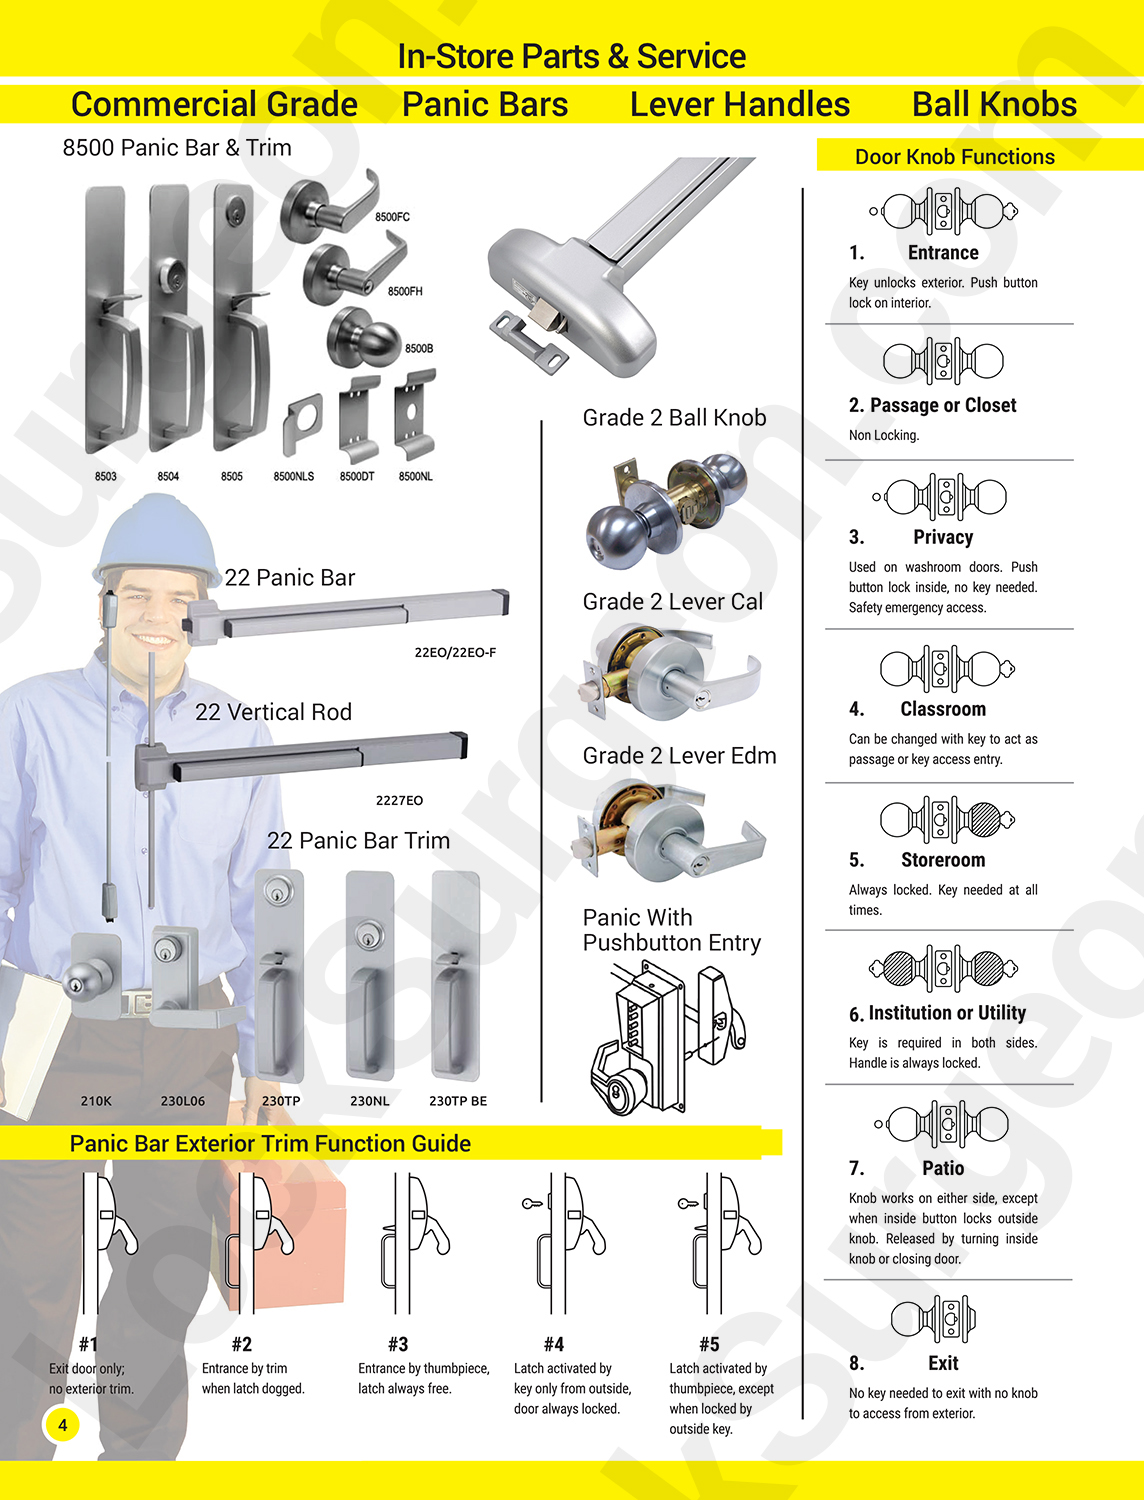 Lock Surgeons in-store parts & service for commercial grade door panic bar lever handle & ball knob.